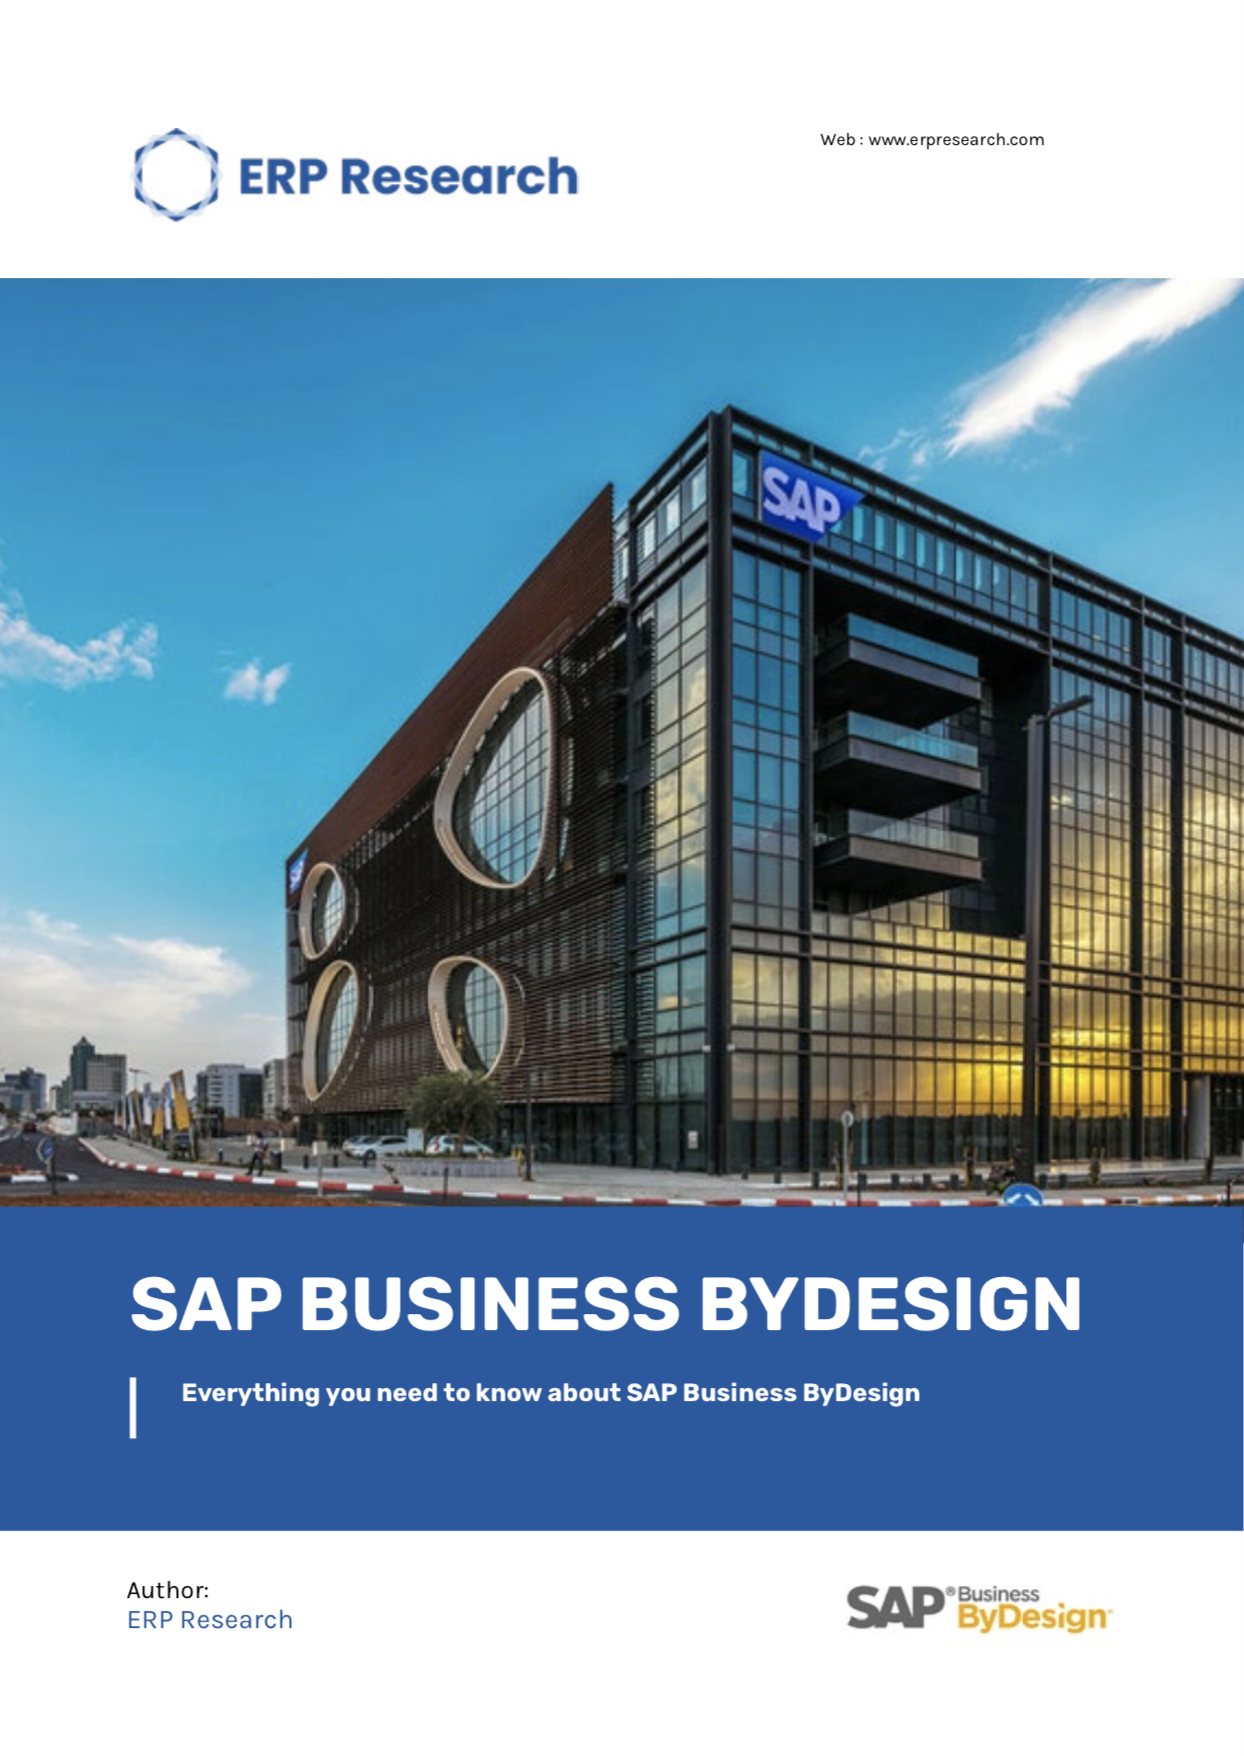 This ebook is the best aide for finance, supply chain and IT executives who are evaluating new ERP systems and software for their businesses SAP Business ByDesign